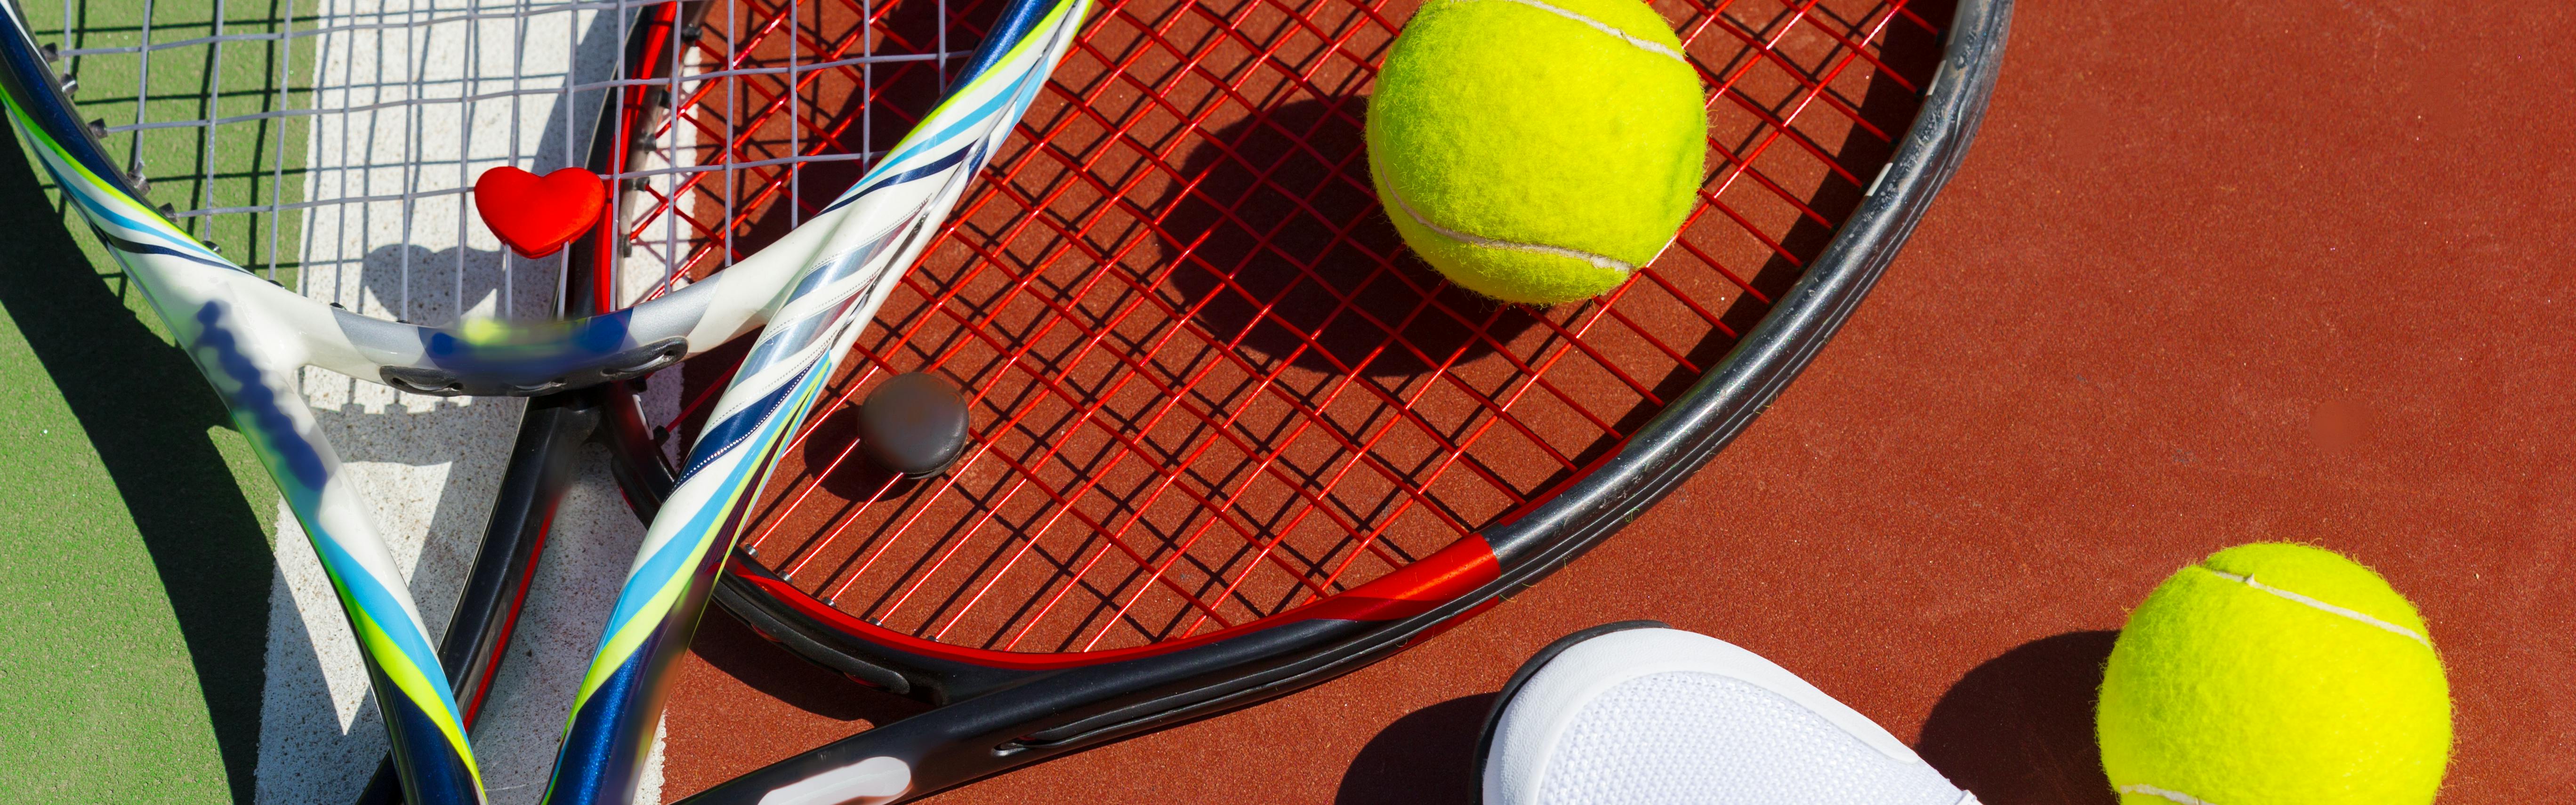 Tennis Racket Grip: How to Hold for Your Racket